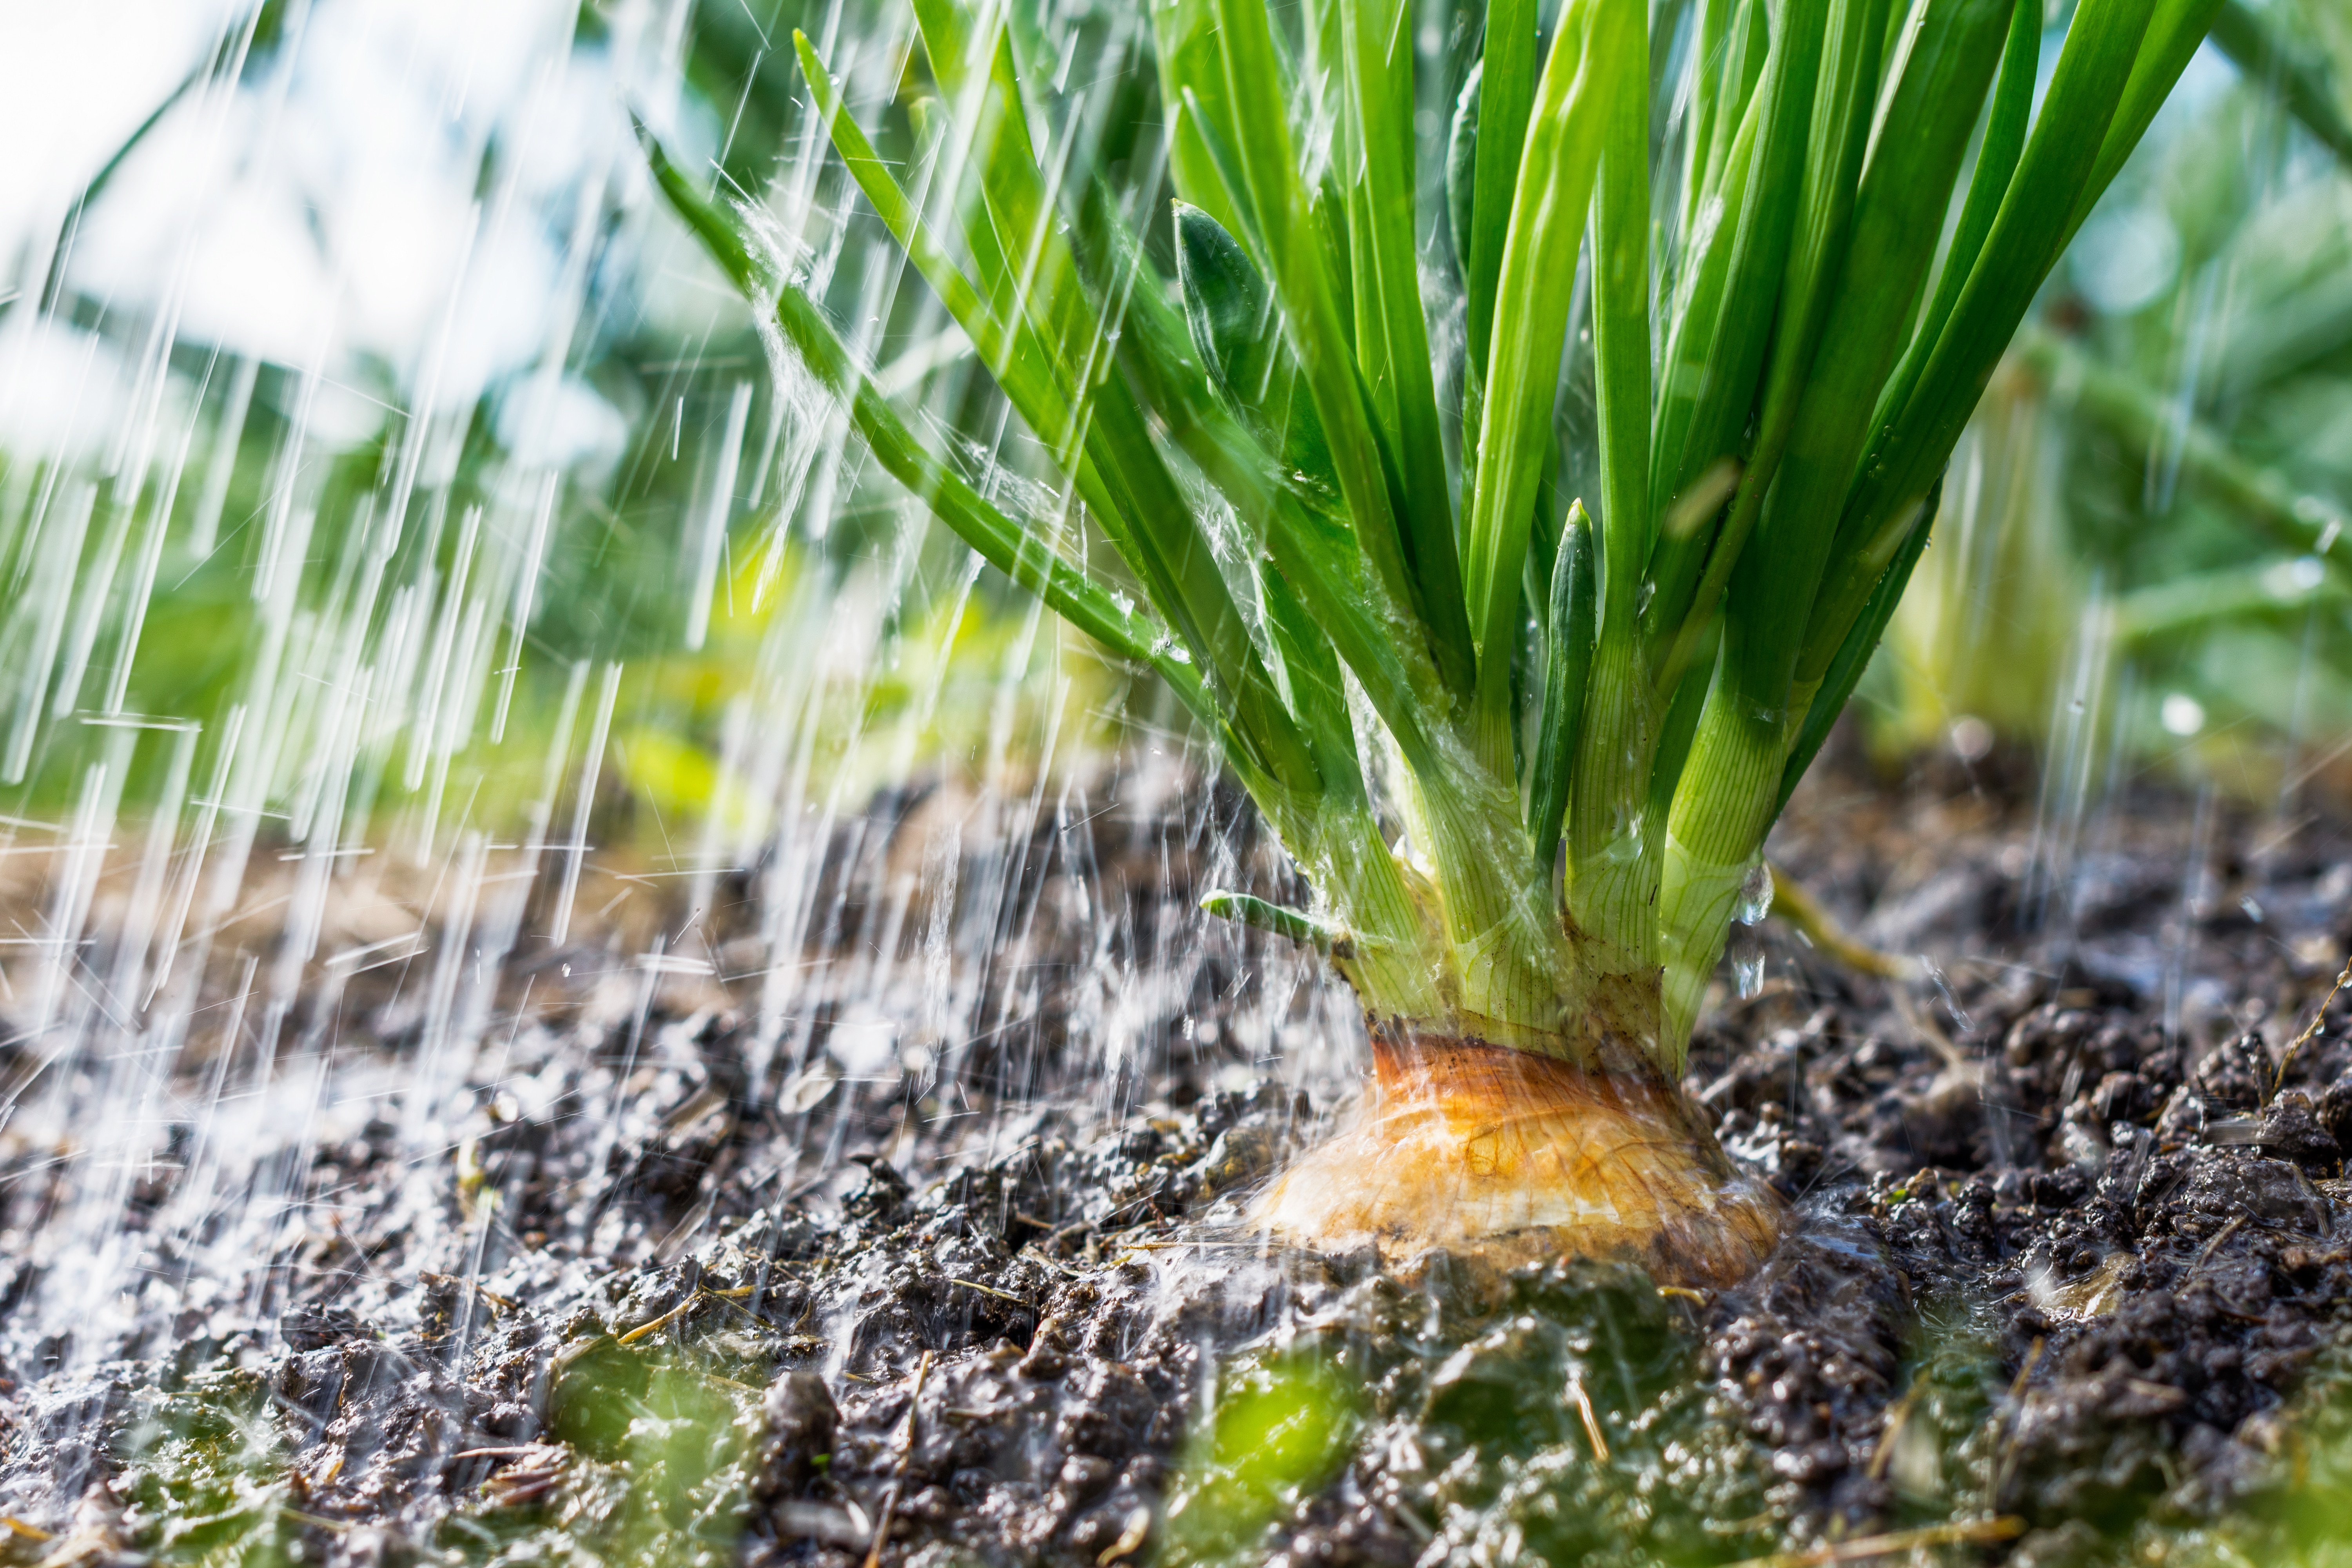 Rainfall is going in the vegetable garden; onion in the soil, agriculture and gardening concept